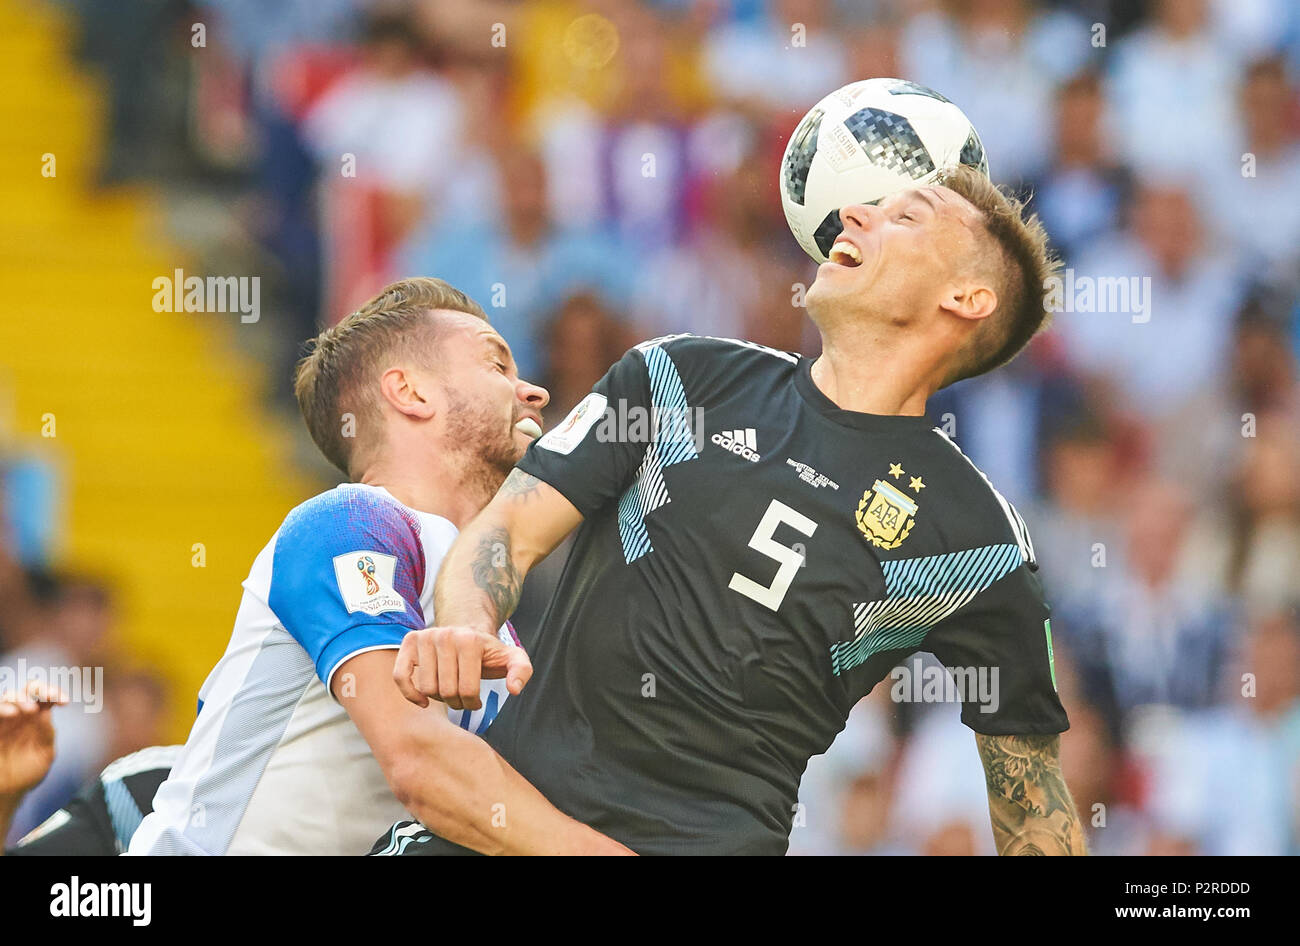 Moscow, Russia. 16th Jun, 2018. Argentina- Iceland, Soccer, Moscow, June 16, 2018 Lucas BIGLIA, Argentina 5   compete for the ball, tackling, duel, header against Kari ARNASON, ISL 14  ARGENTINA - ICELAND FIFA WORLD CUP 2018 RUSSIA, Season 2018/2019,  June 16, 2018 S p a r t a k Stadium in Moscow, Russia.  © Peter Schatz / Alamy Live News Stock Photo